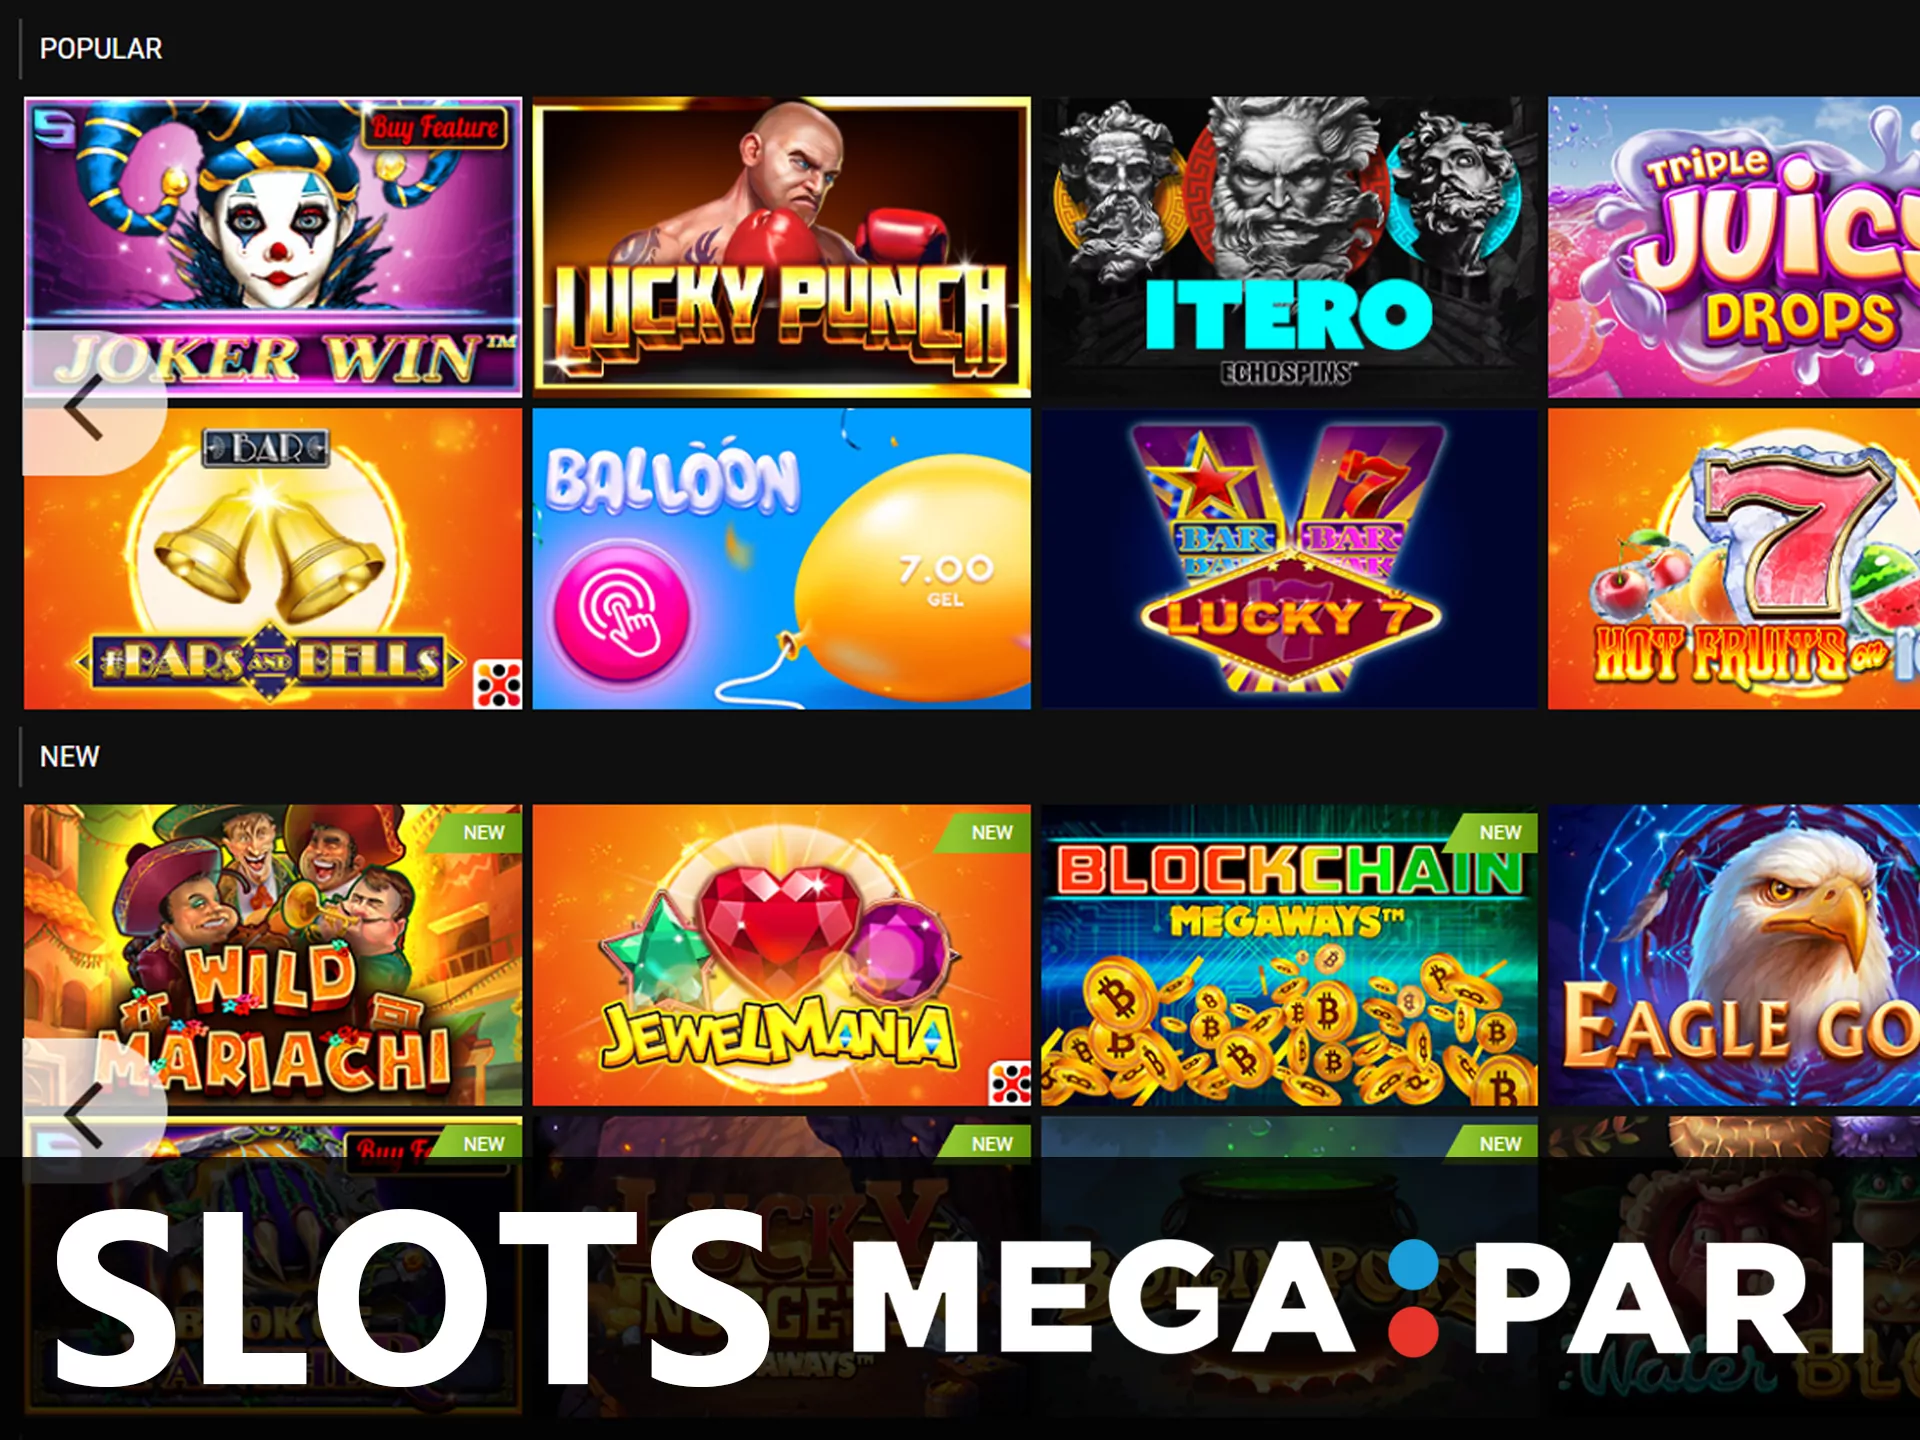 Play different well-known slots at Mega Pari.